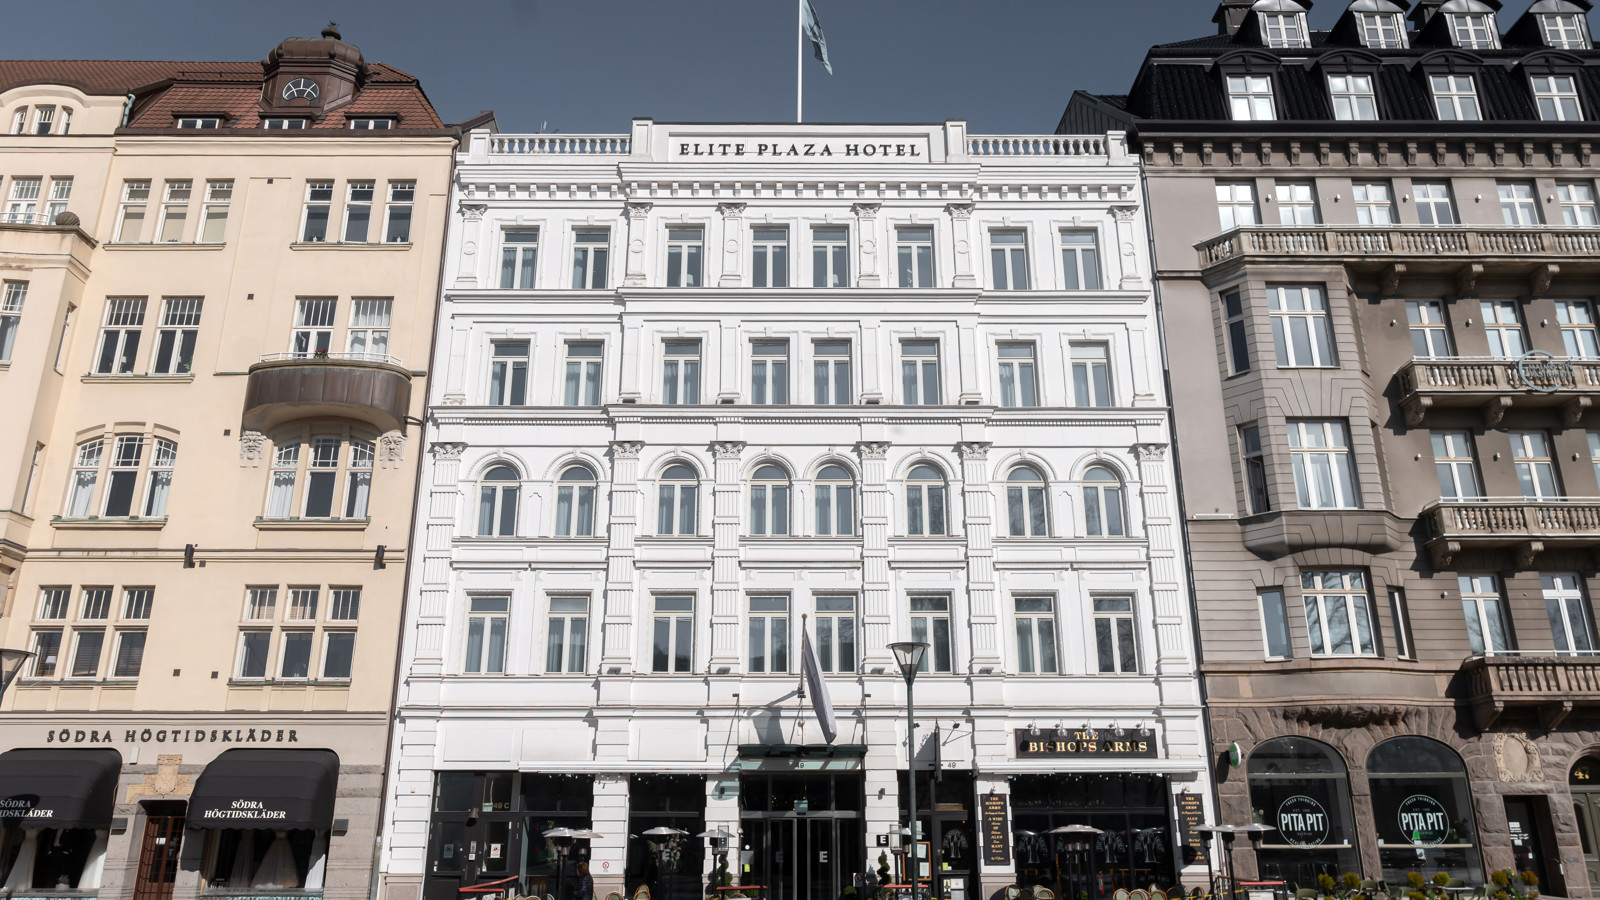 The white facade of the Elite Plaza Hotel in Malmö with a shopping street in front